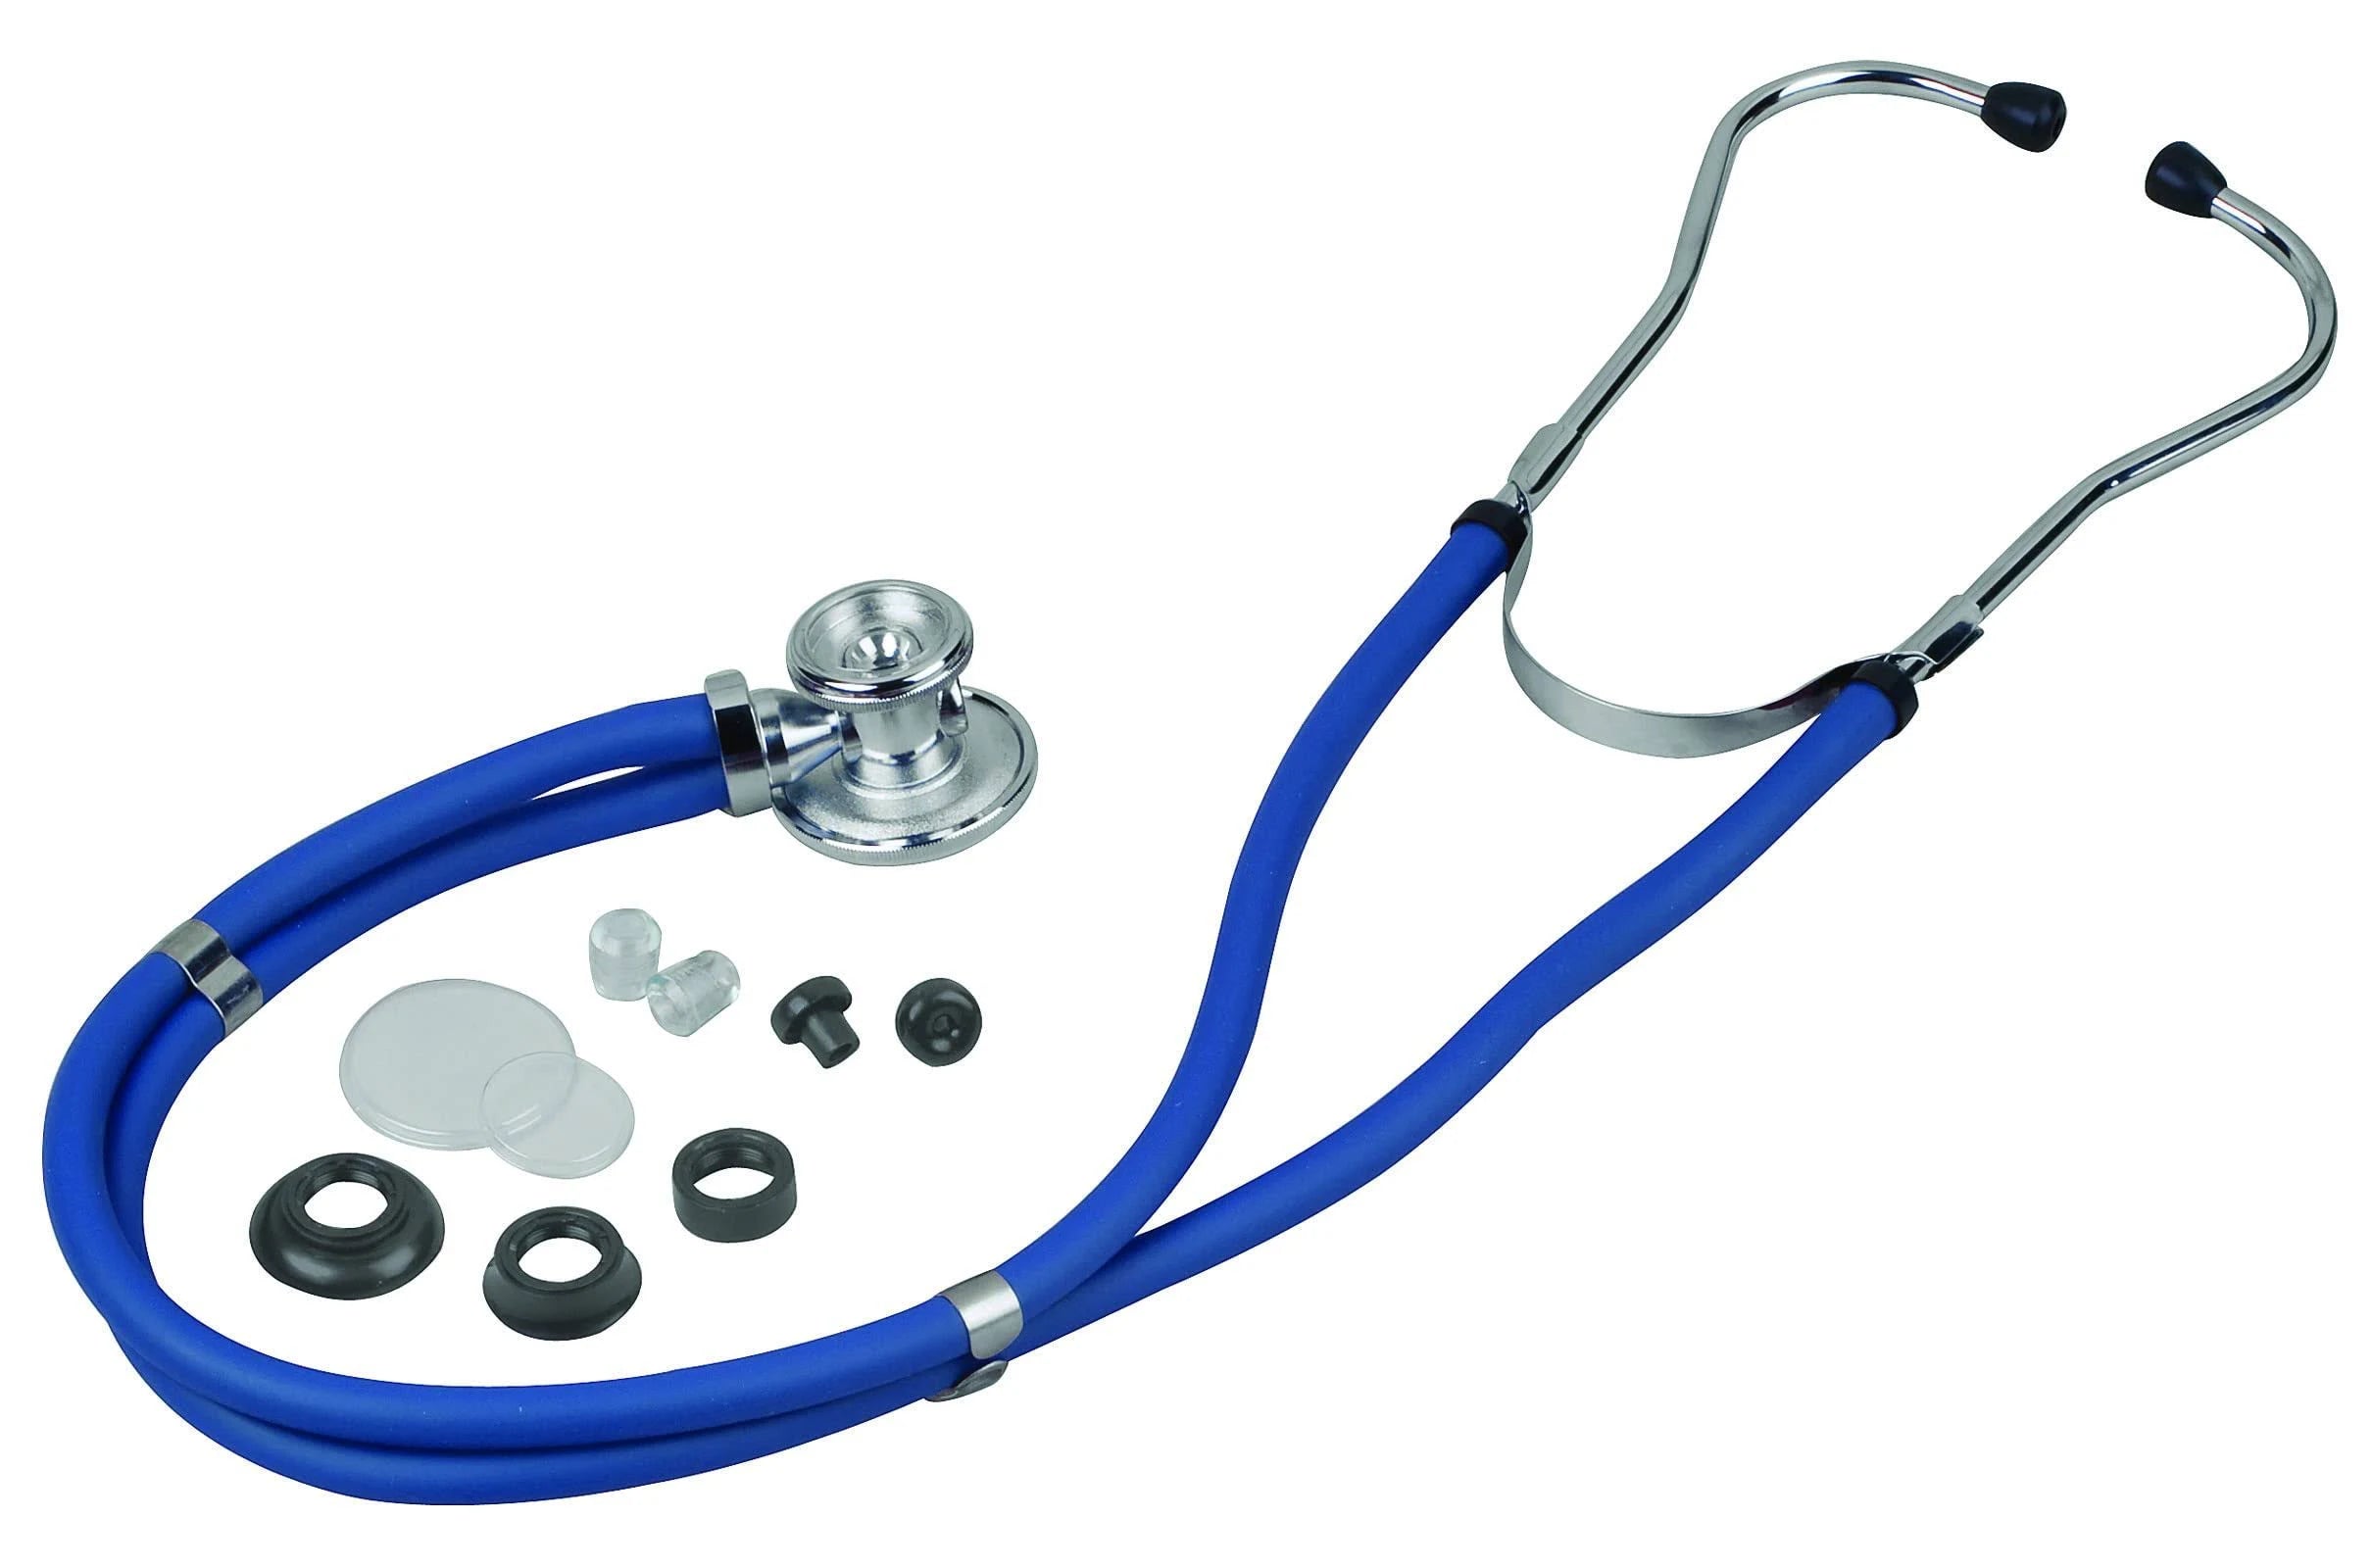 Veridian Healthcare Sterling Series Sprague Rappaport-Type Stethoscope